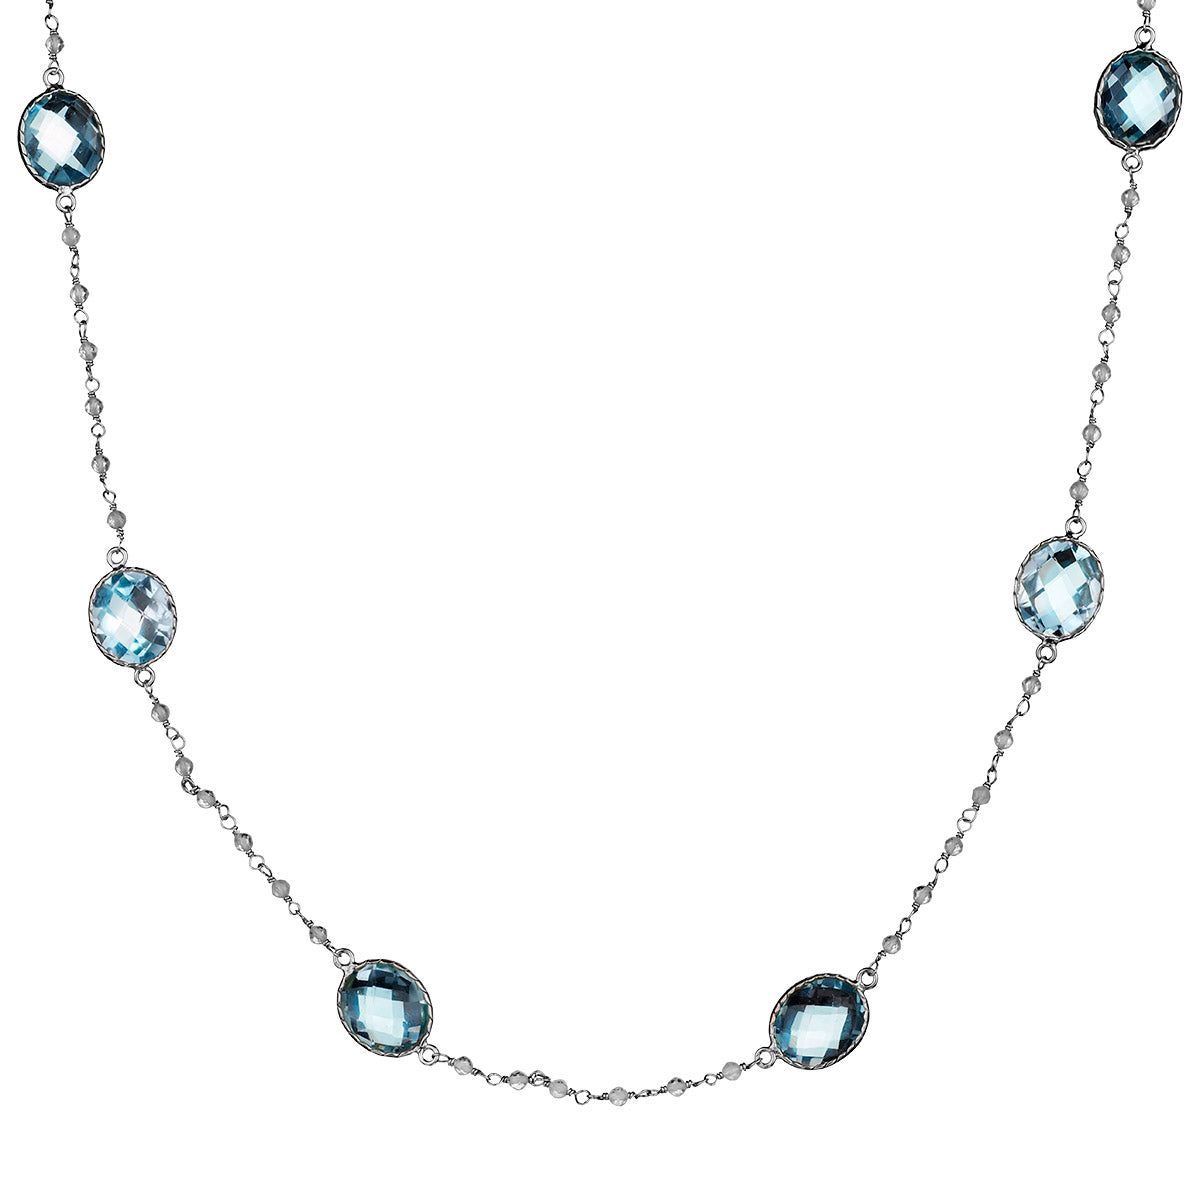 32.0 TW Genuine Swiss Blue & White Topaz Necklace, Sterling Silver. Necklaces and Pendants. Griffin Jewellery Designs. 